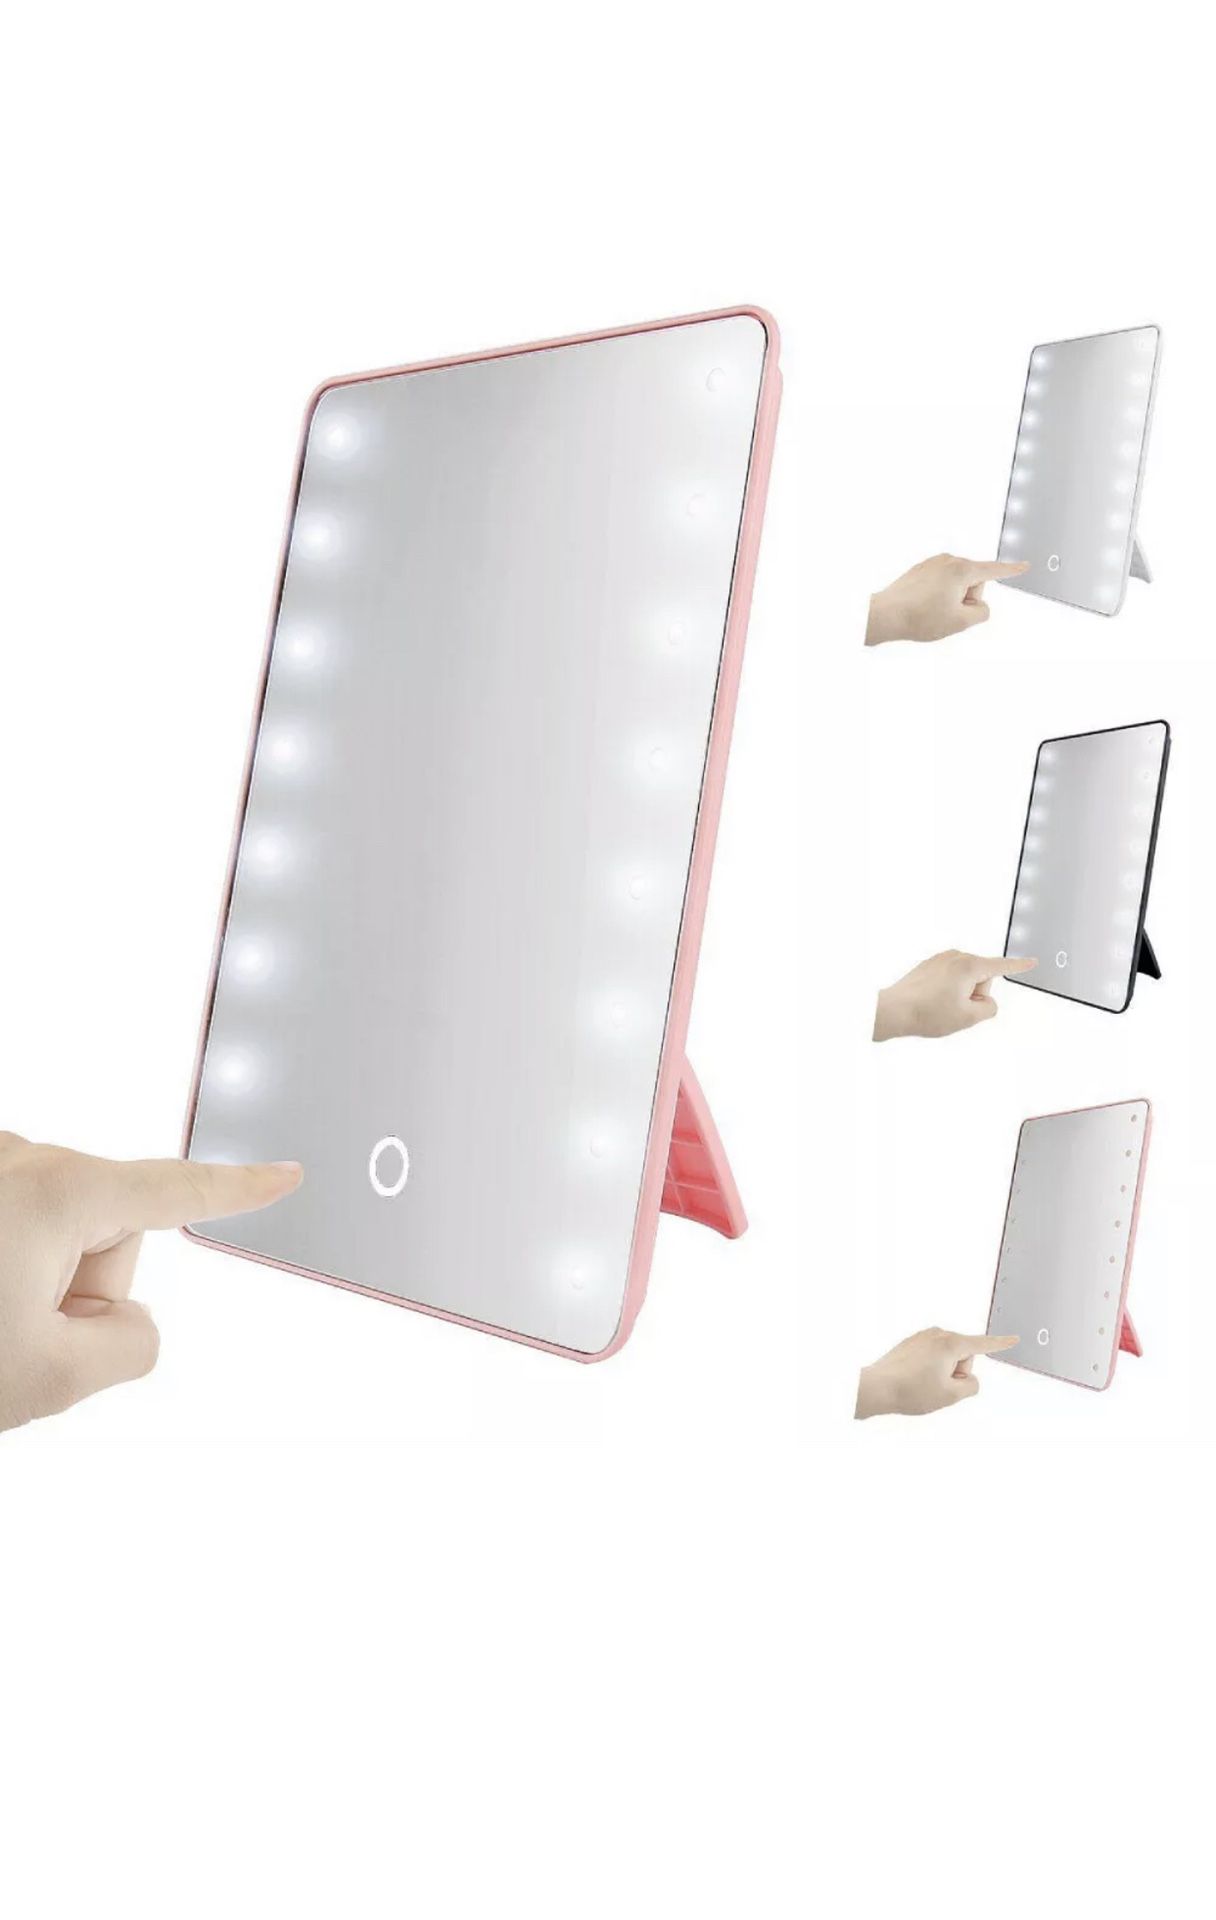 16 LED Light Vanity Mirror 10X Magnifying Touch Screen Makeup Cosmetic Stand